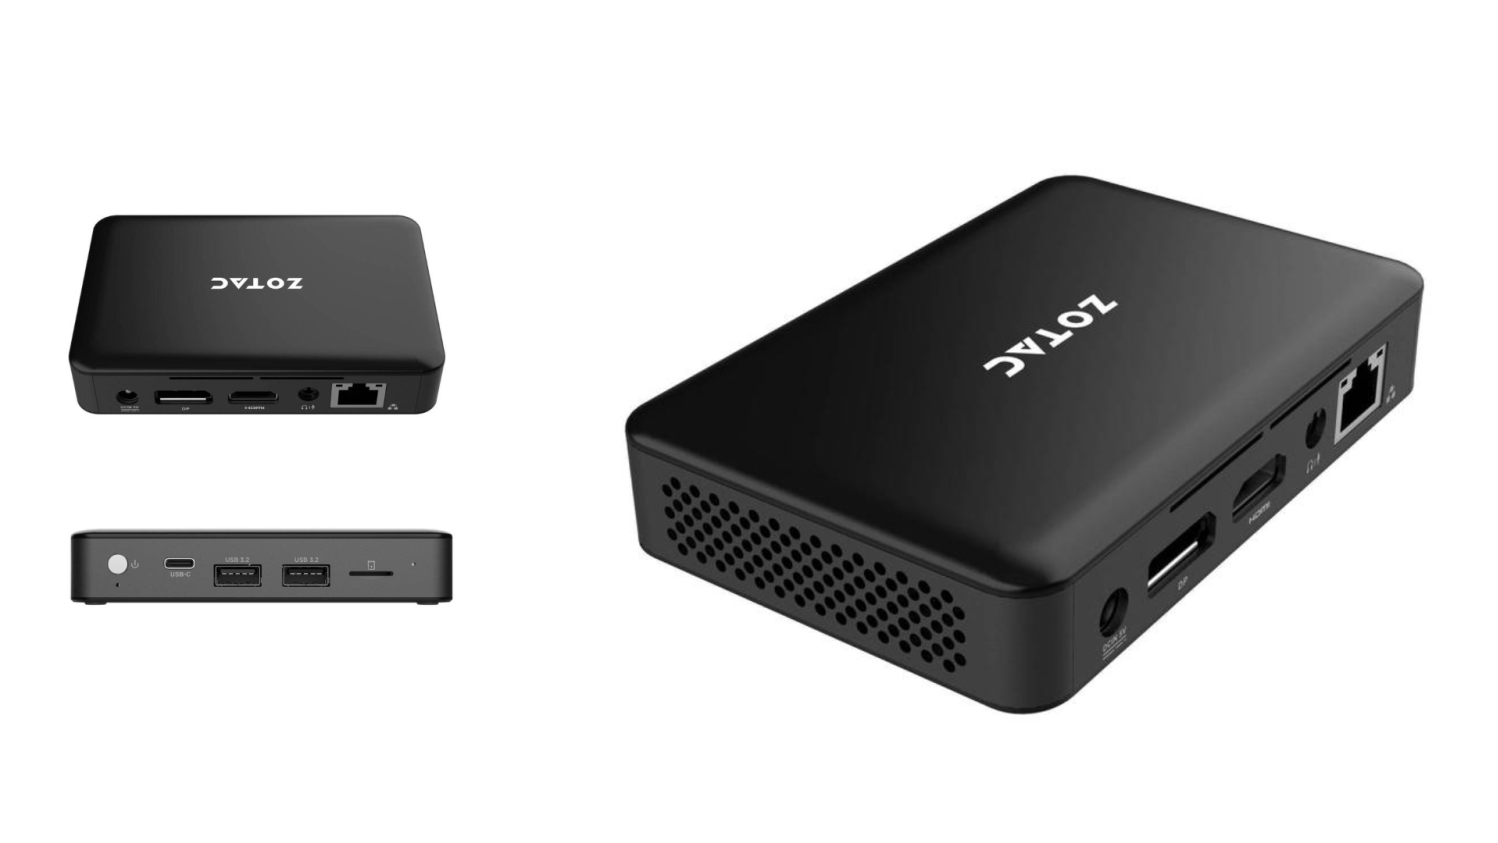 Zotac is bringing the world's smallest Mini PC to Computex 2023